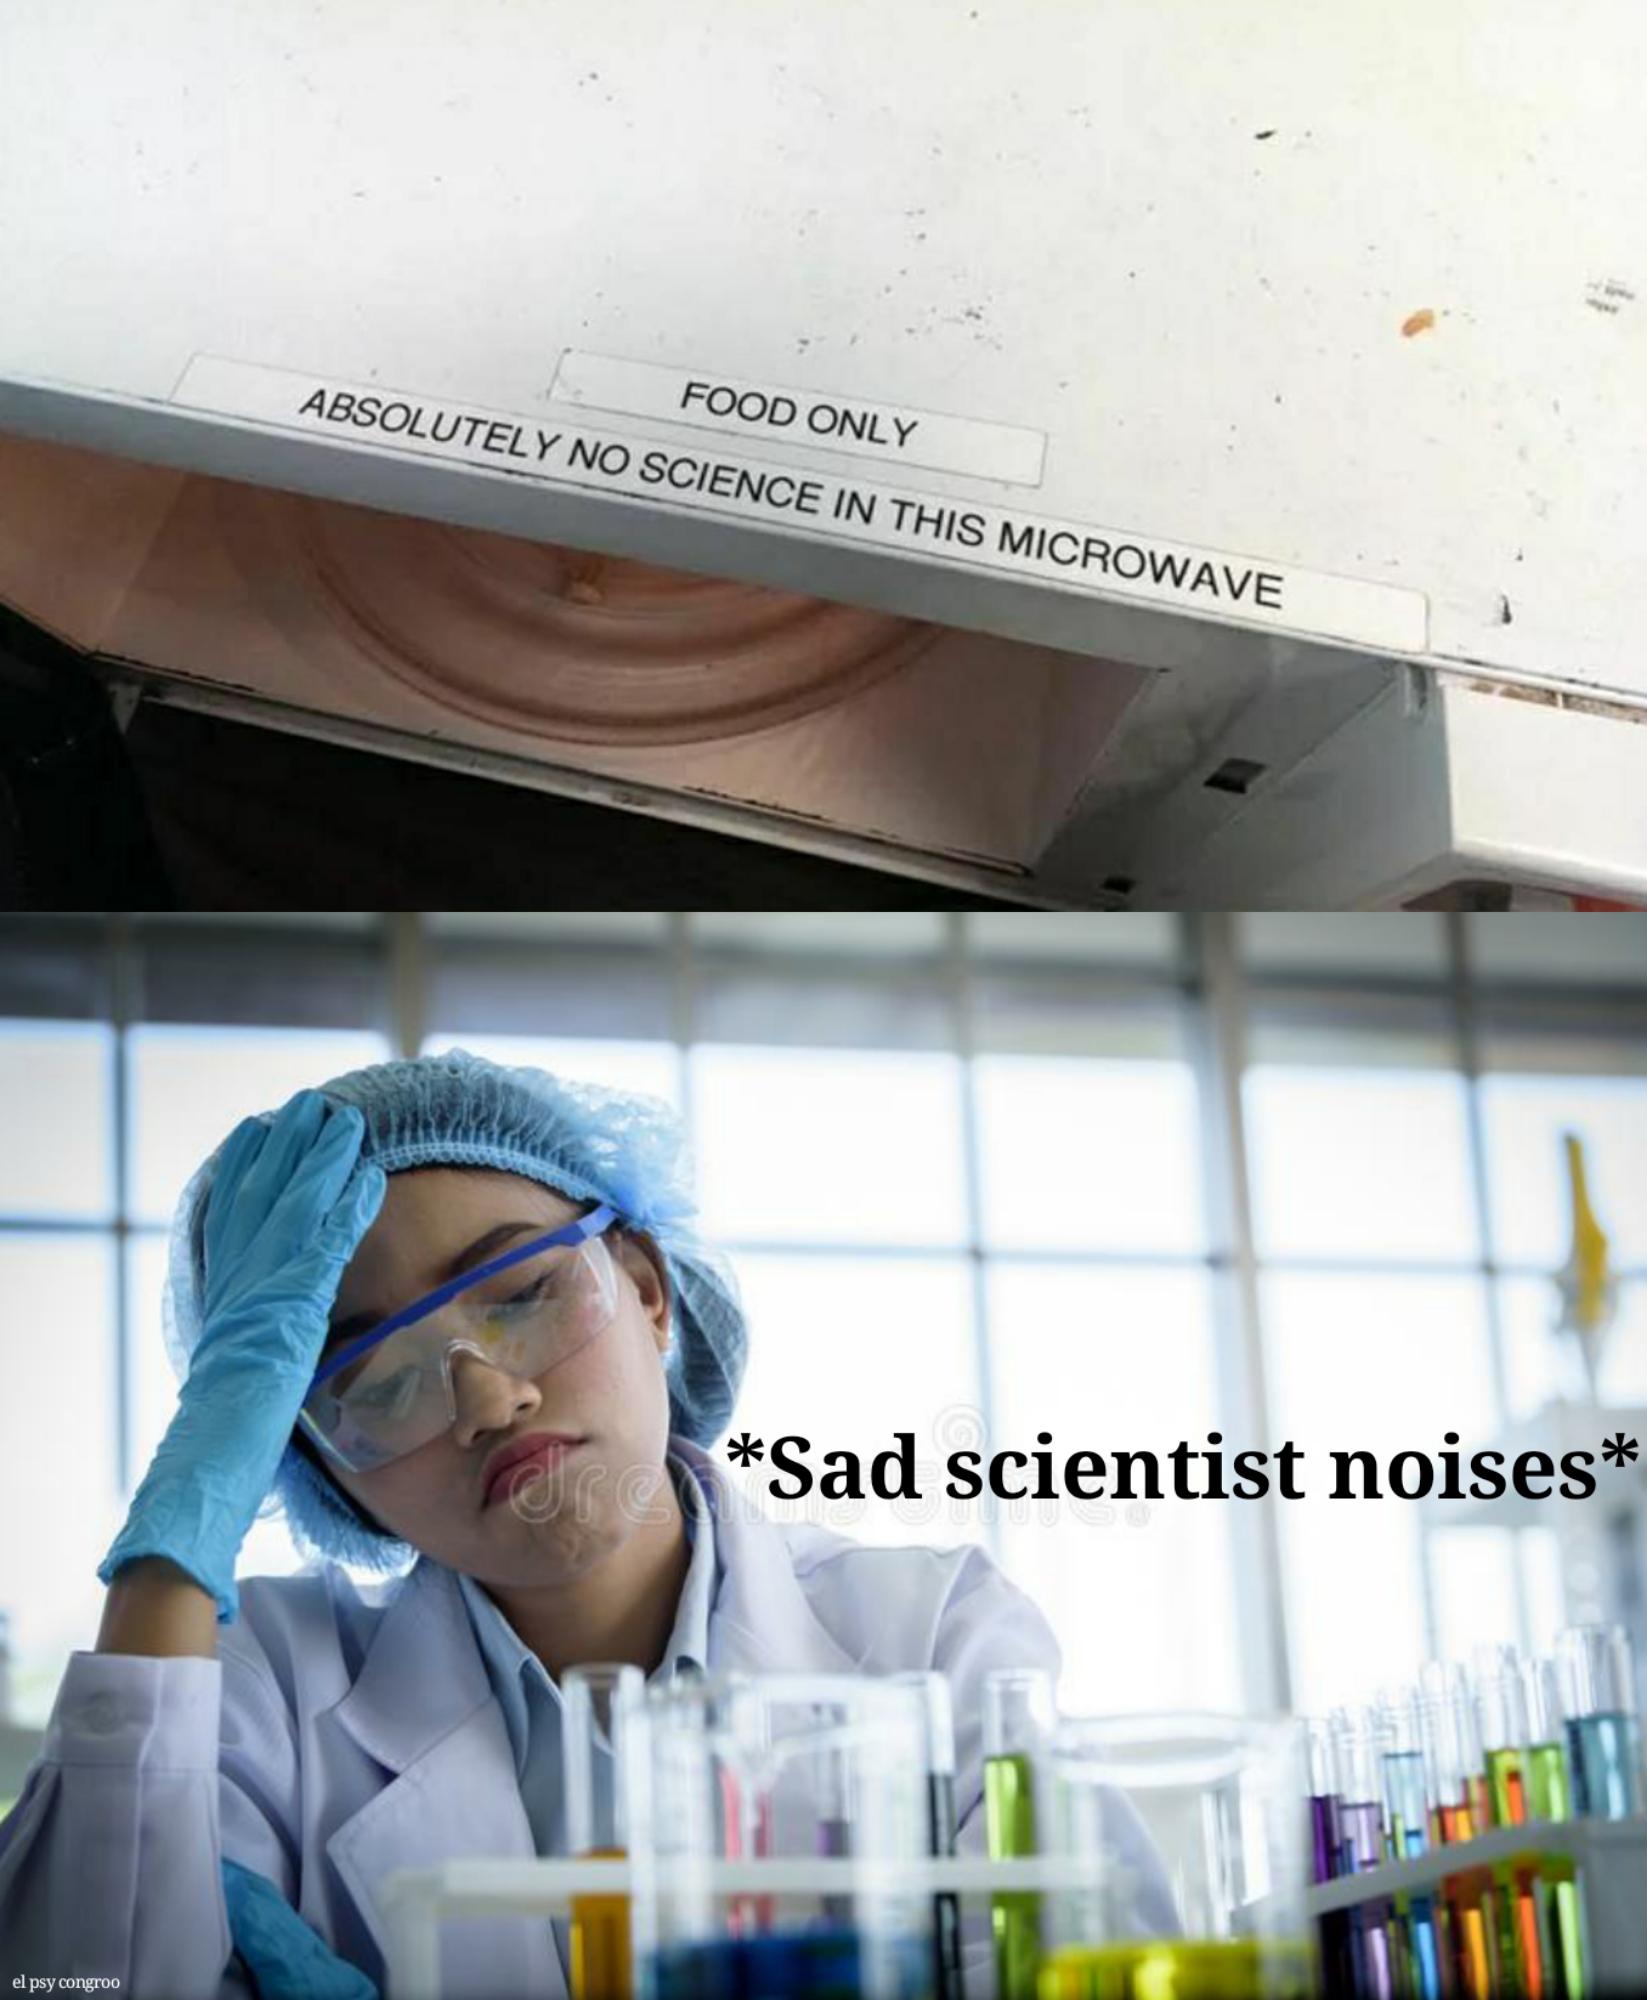 funny memes and pics - glasses - Absolutely No Science In This Microwave Food Only Je Sad scientist noises el psy congroo